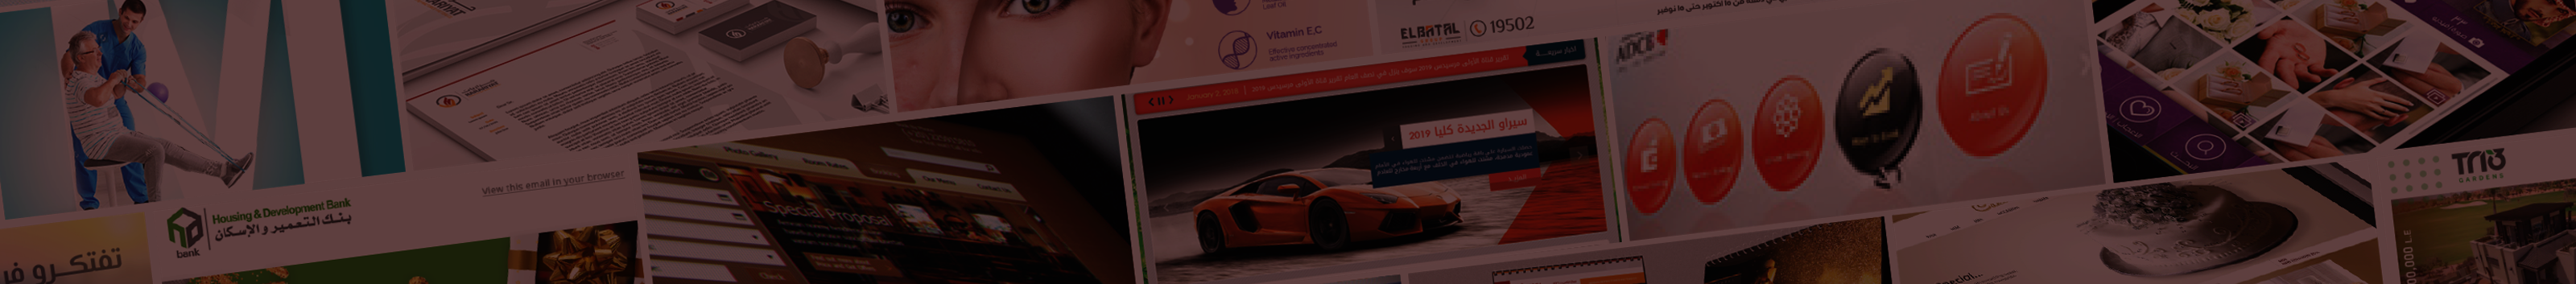 Ehab Alfred's profile banner